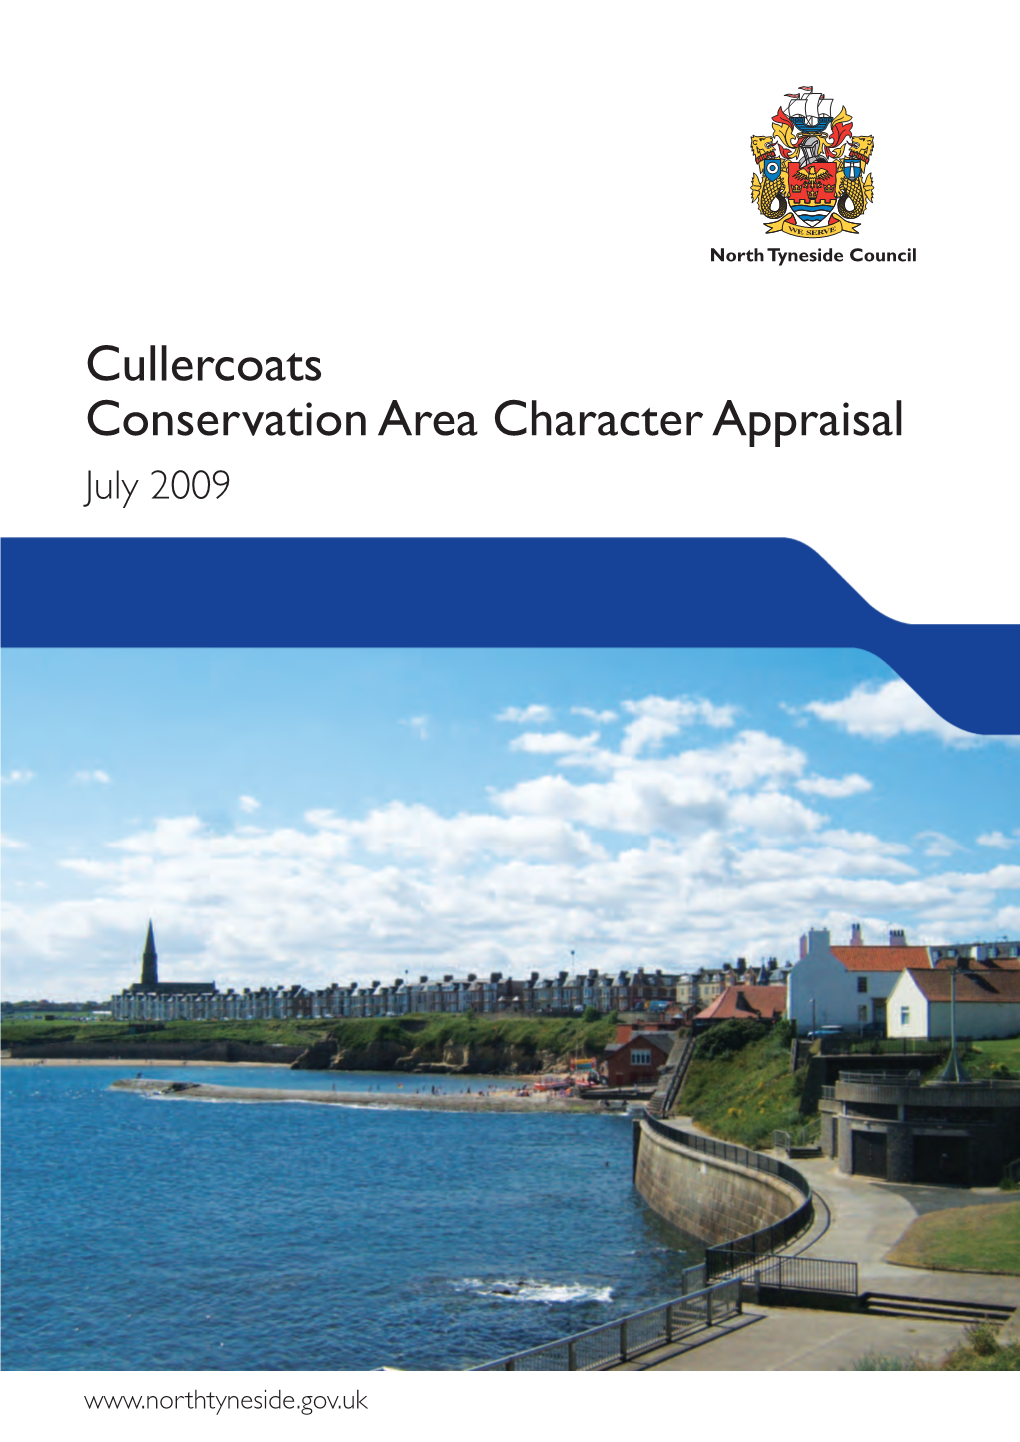 Cullercoats Conservation Area Character Appraisal July 2009